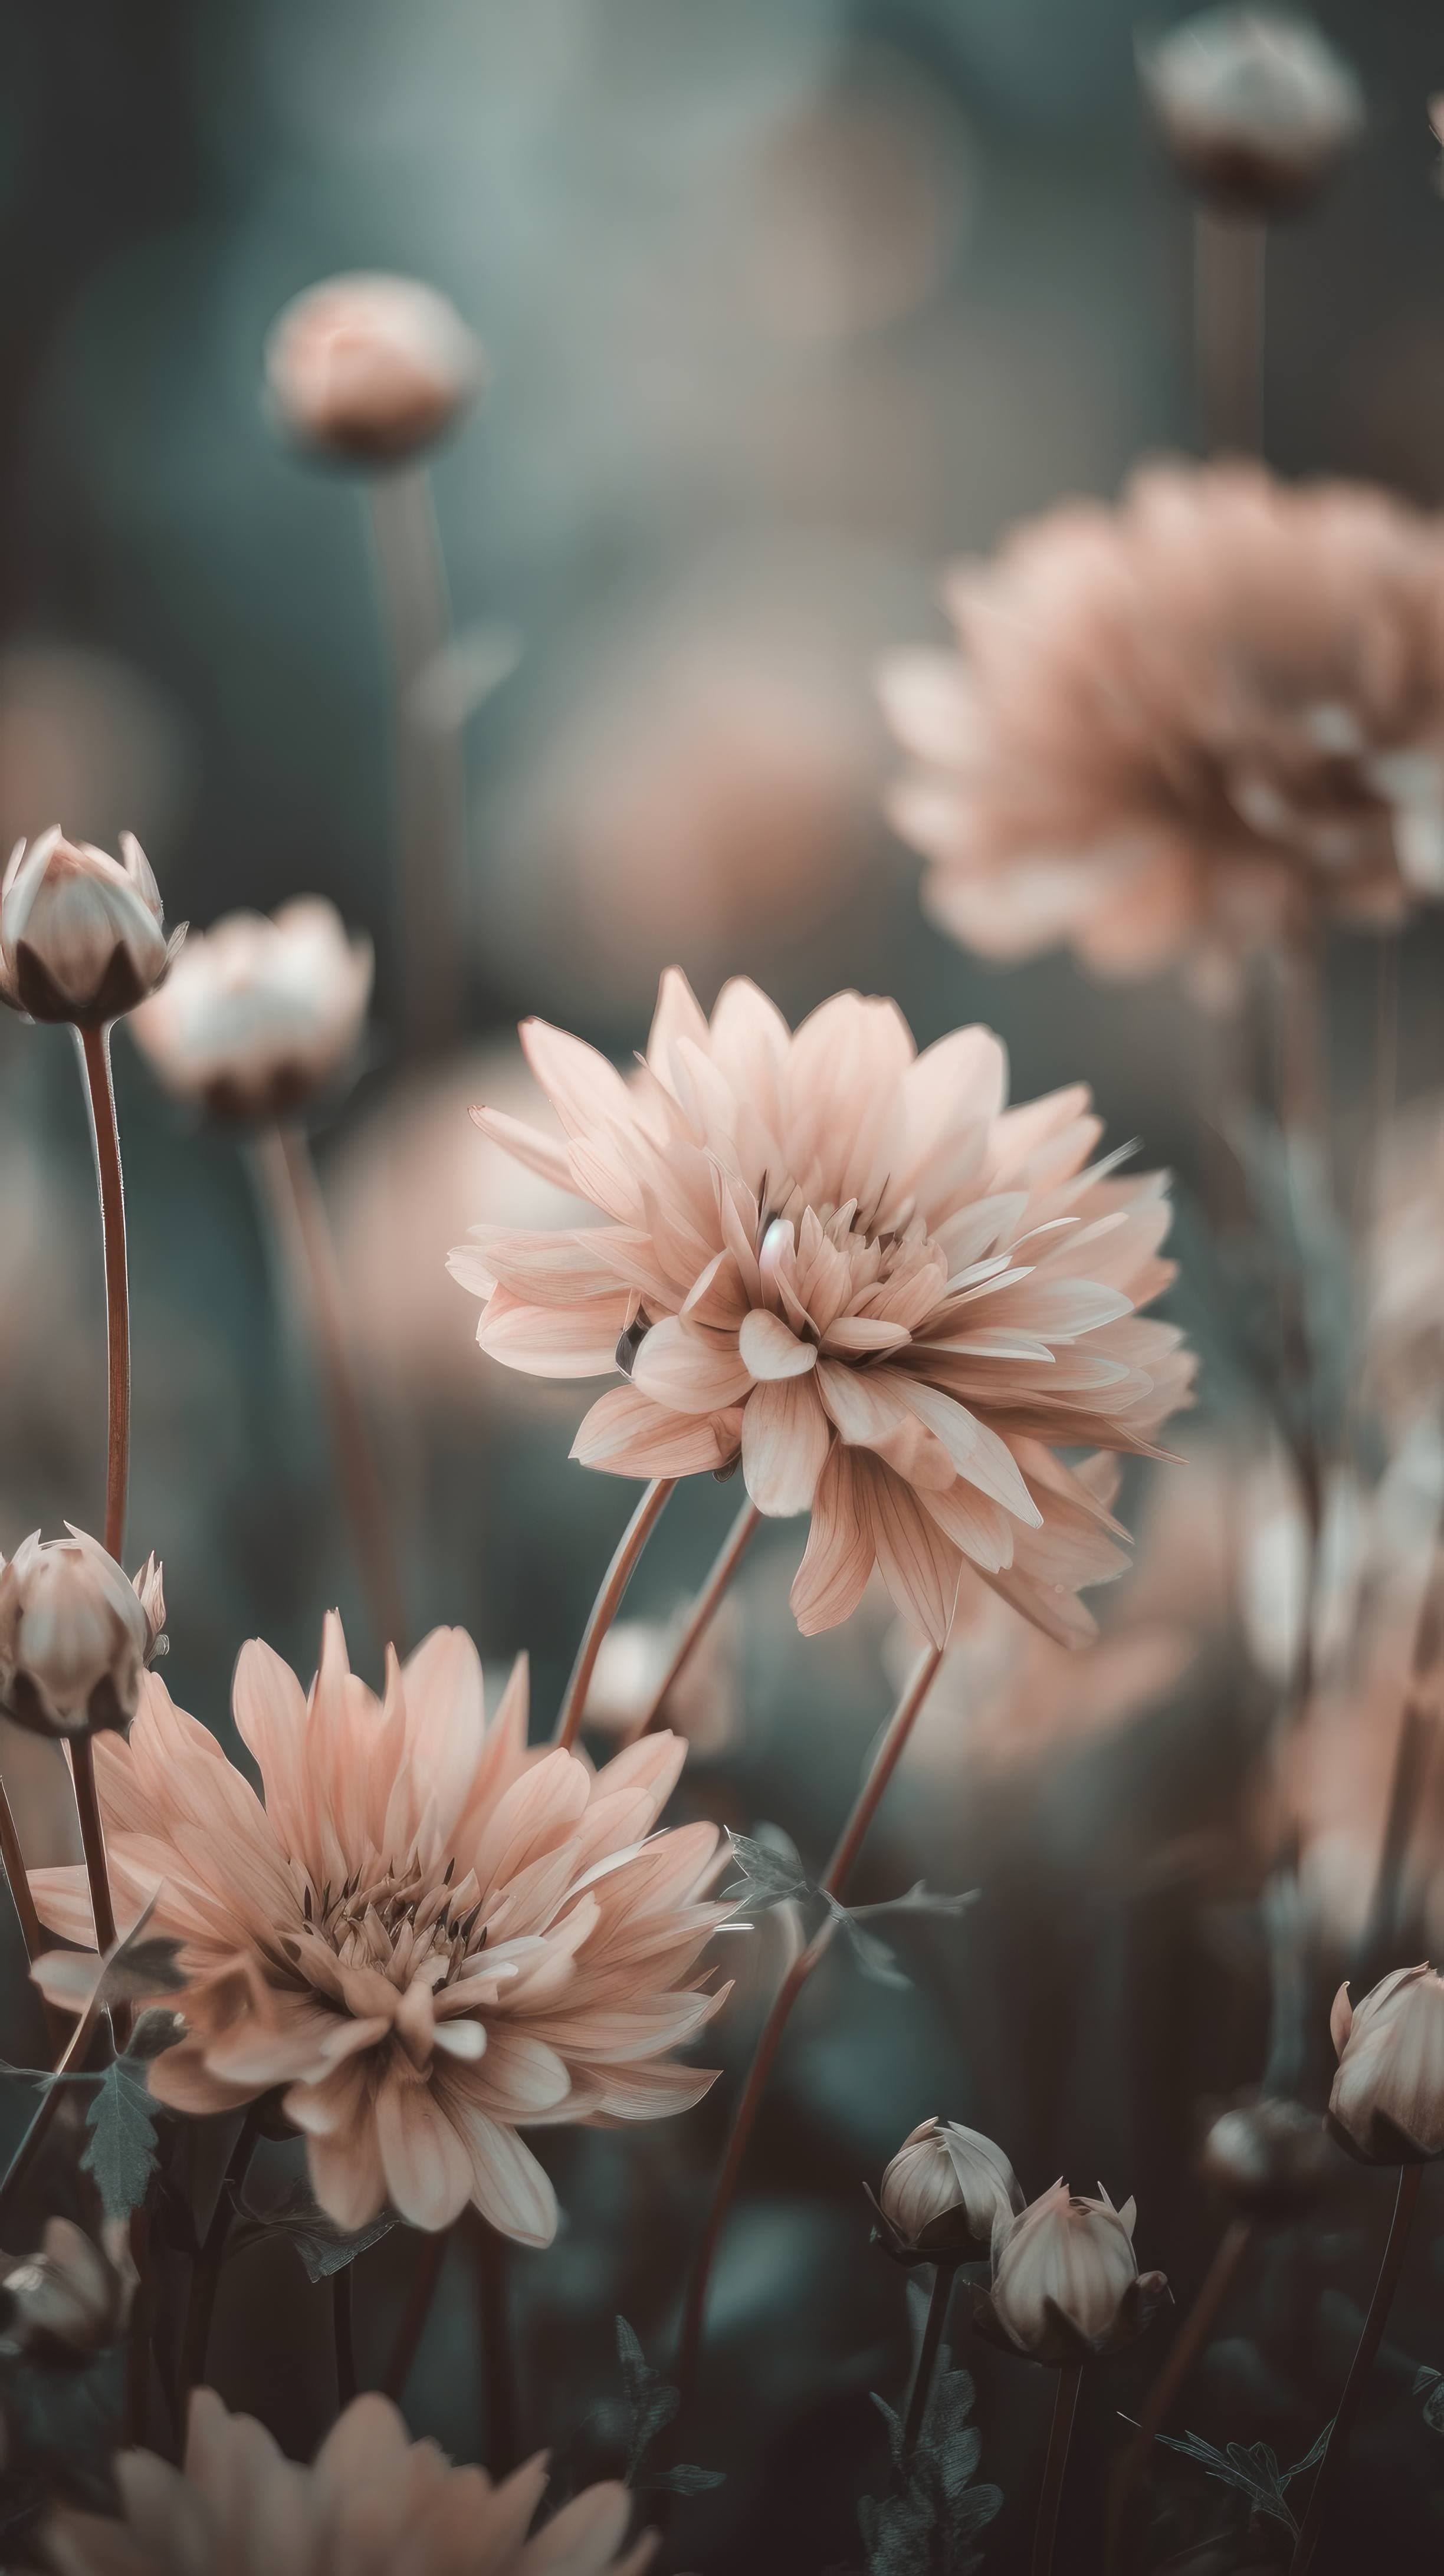 A mesmerizing mobile wallpaper of macro flowers in a dreamy, hazy atmosphere